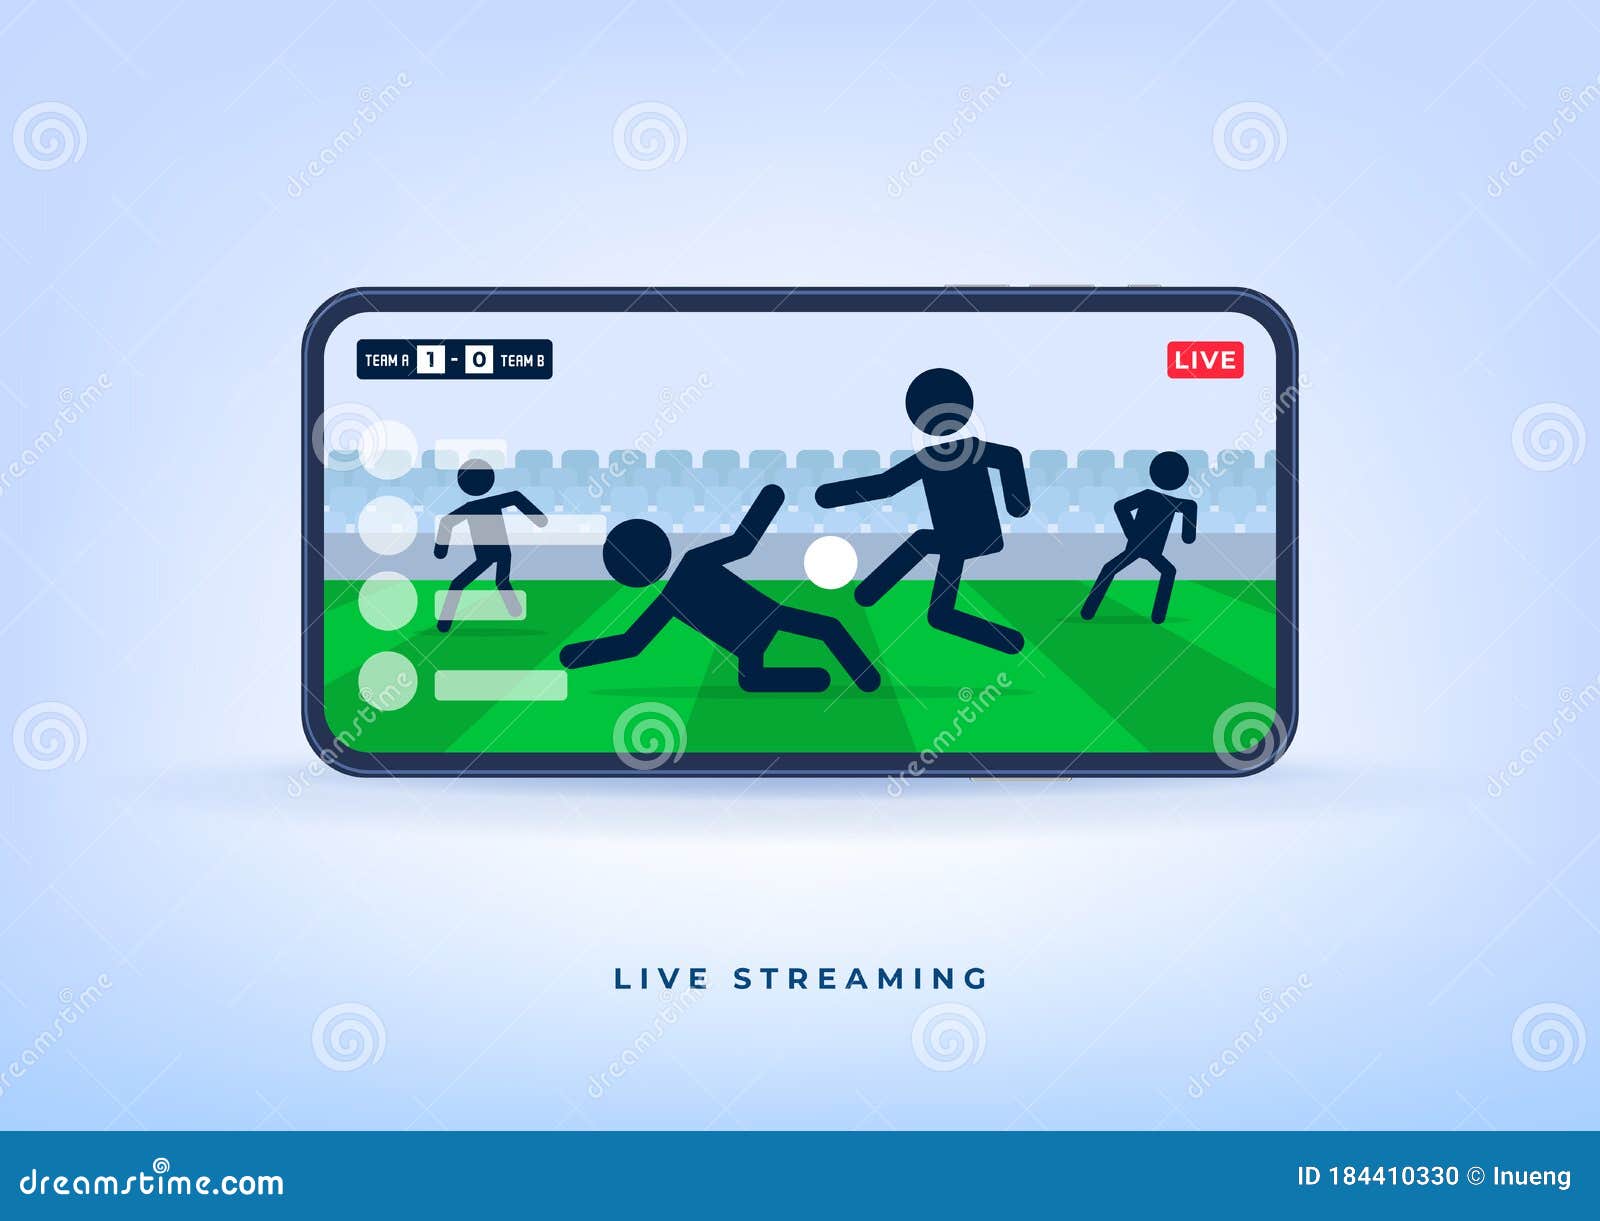 Soccer or Football League Live Streaming on Mobile Phone